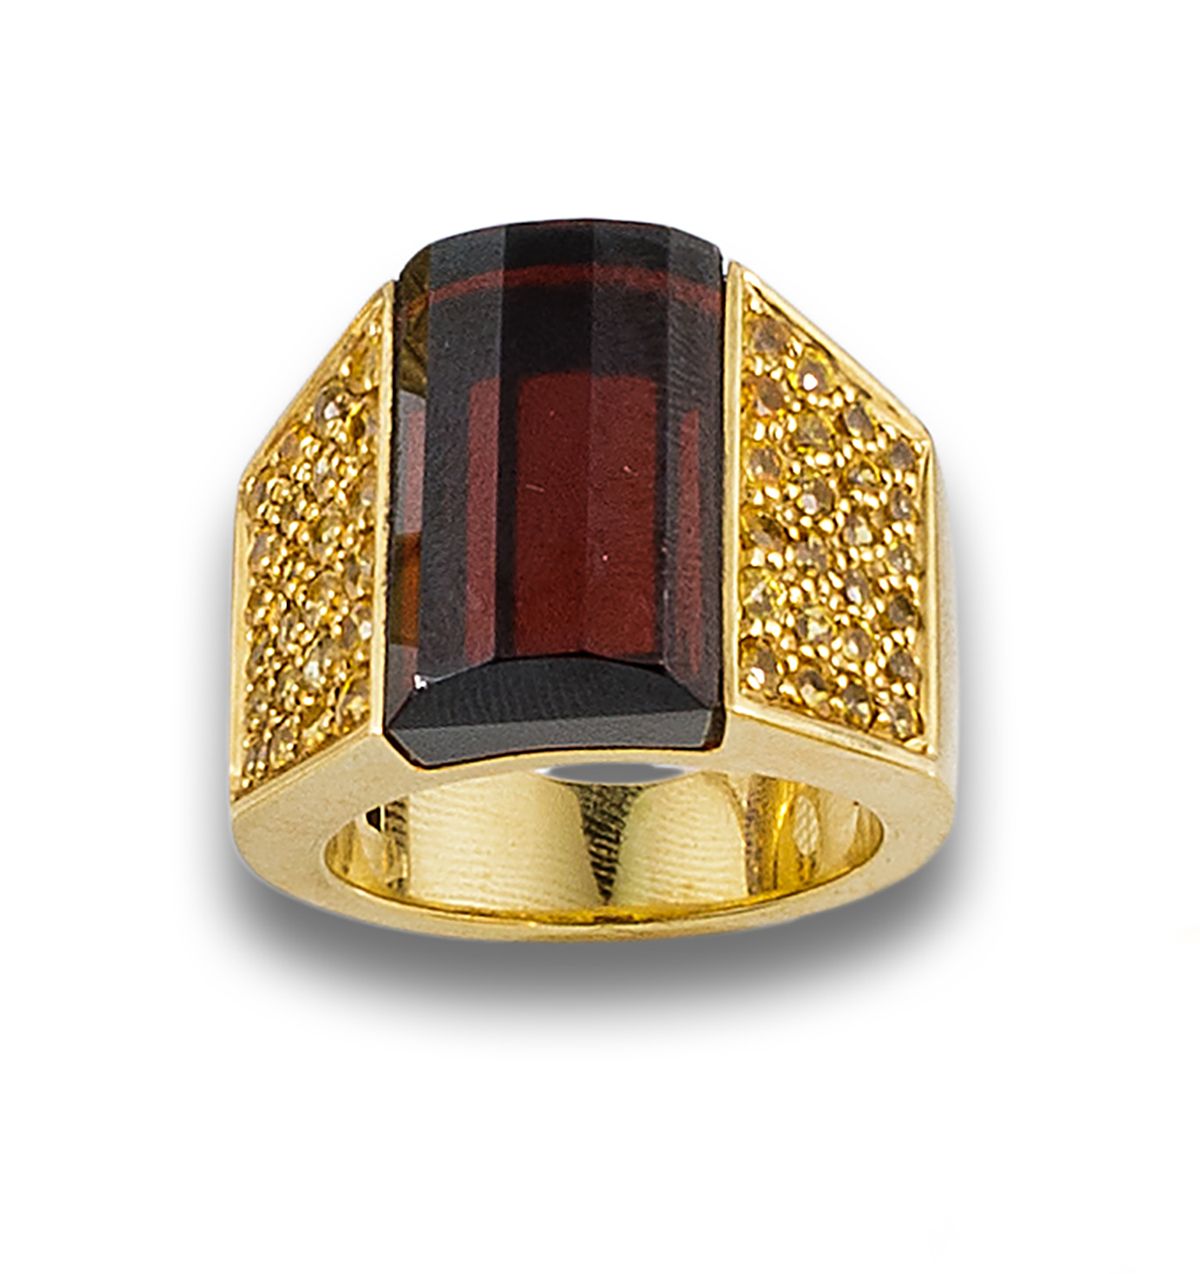 Large signed VASARI ring in 18 kt yellow gold. Formed by a central faceted garne&hellip;